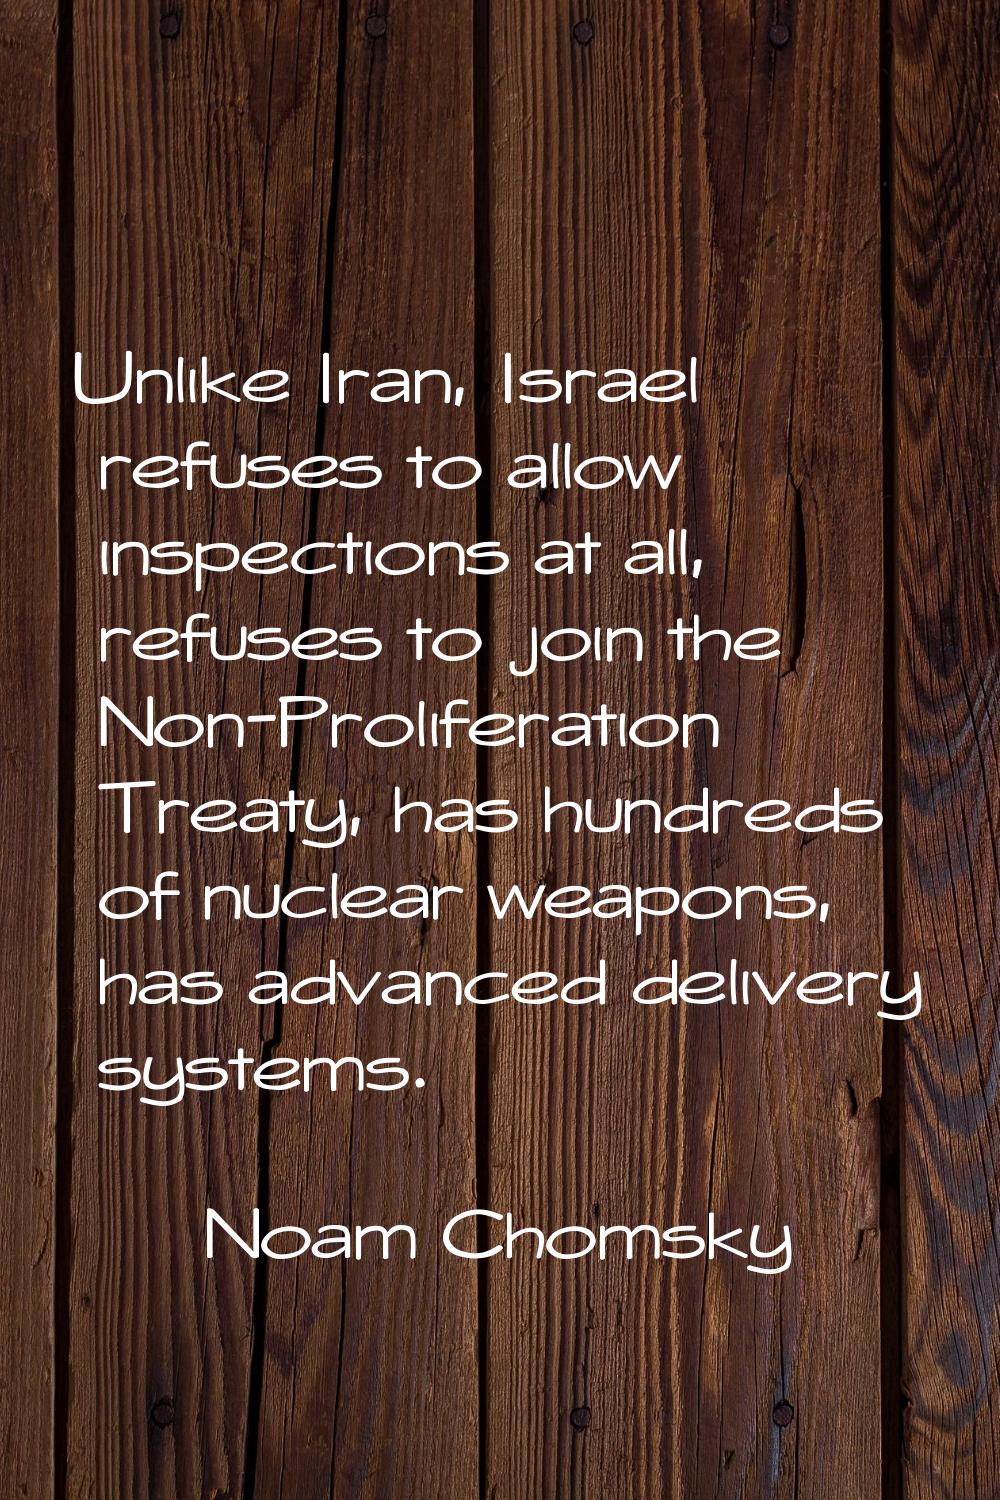 Unlike Iran, Israel refuses to allow inspections at all, refuses to join the Non-Proliferation Trea